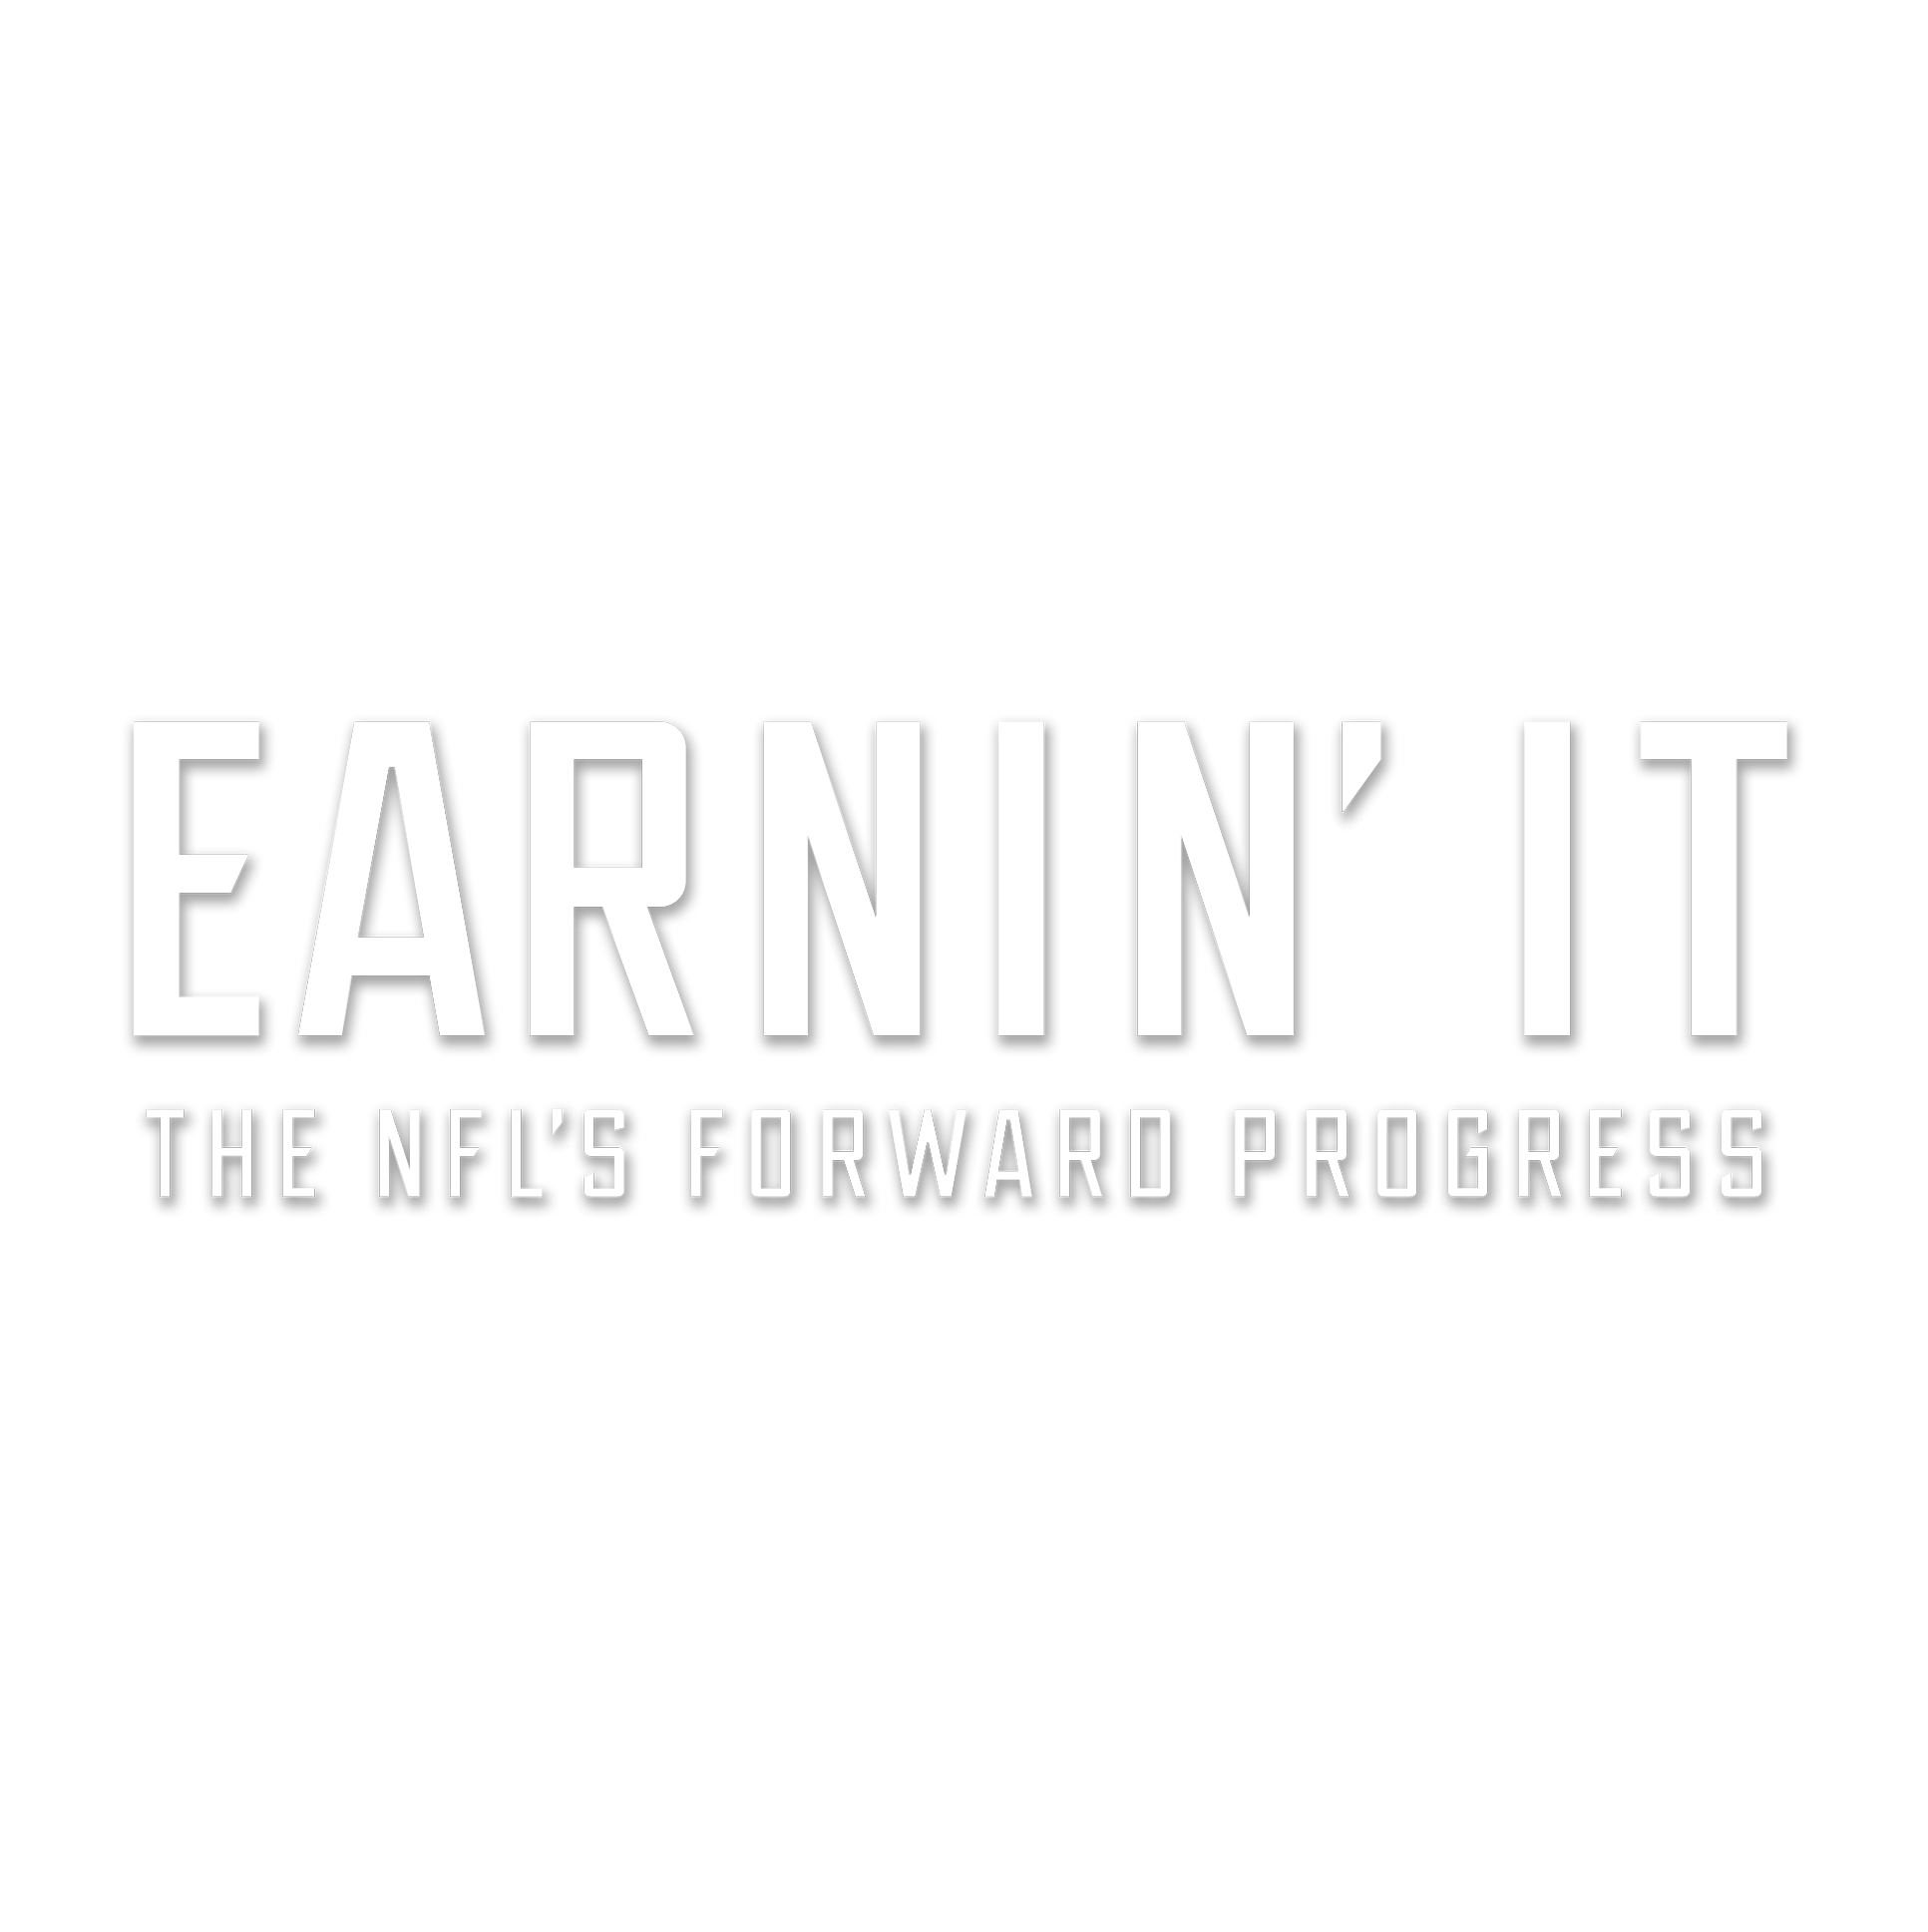 How To Watch - NFL Network